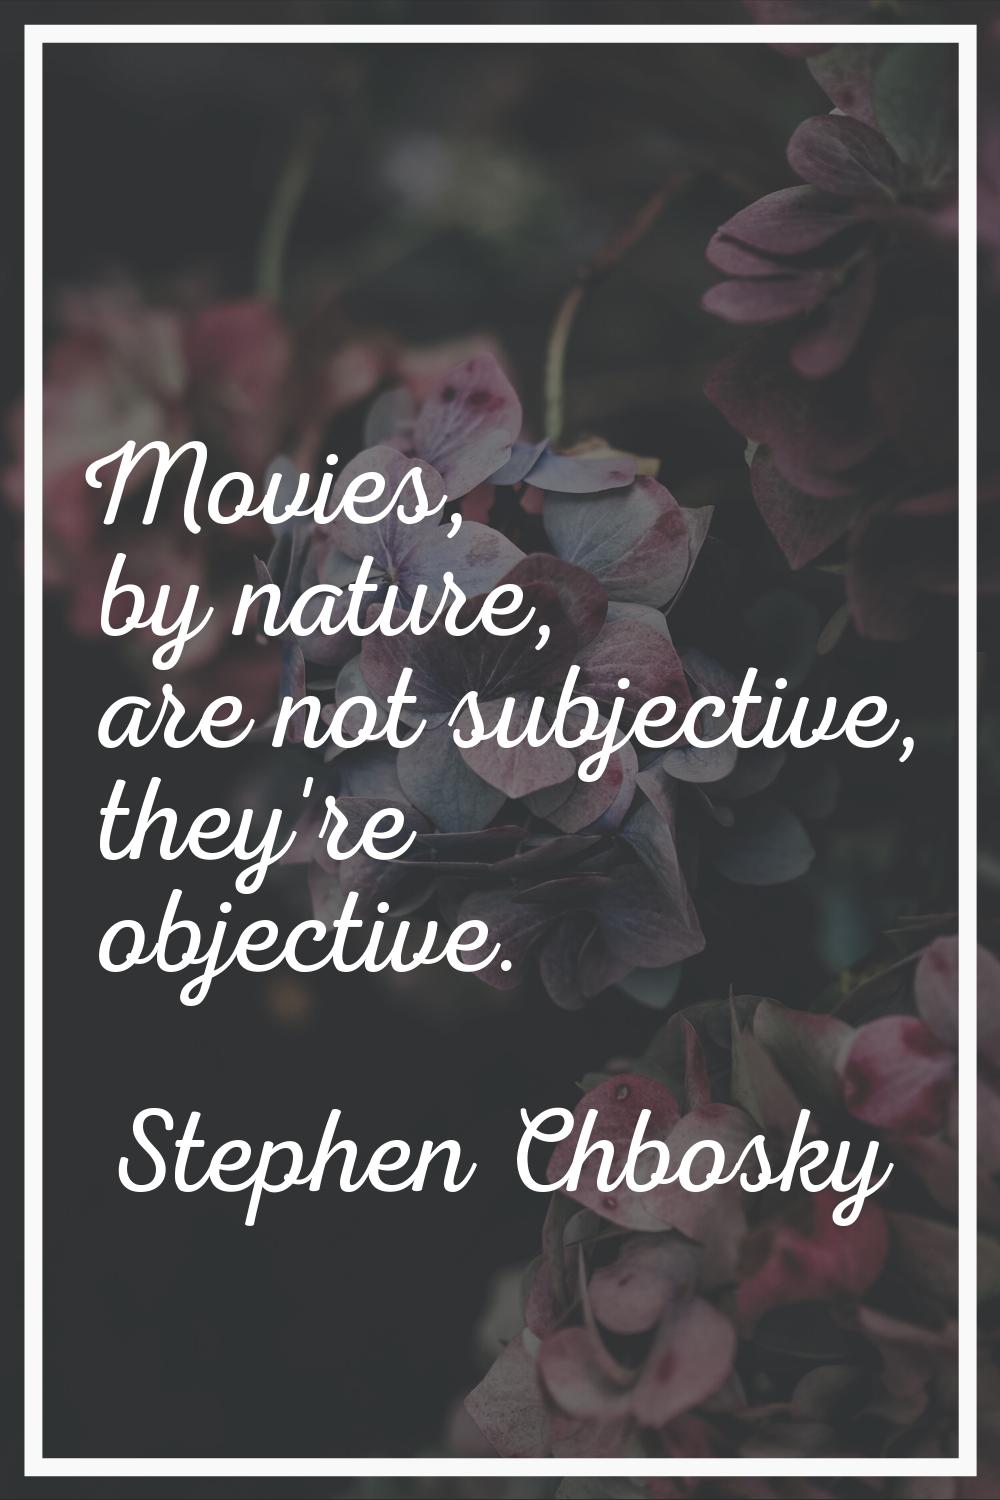 Movies, by nature, are not subjective, they're objective.